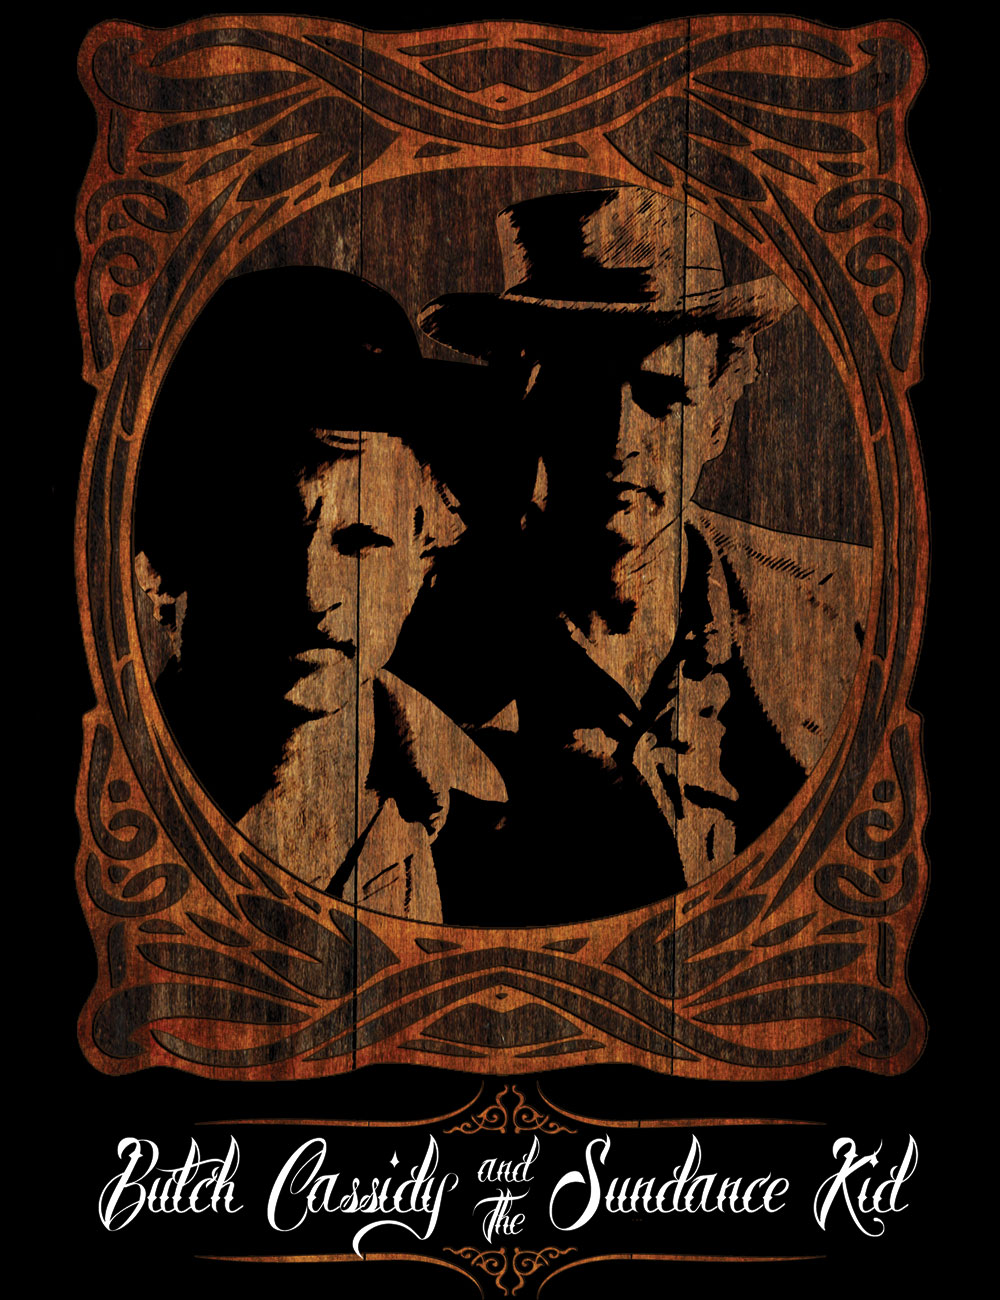 Butch Cassidy and the Sundance Kid T-Shirt - Hellwood Outfitters